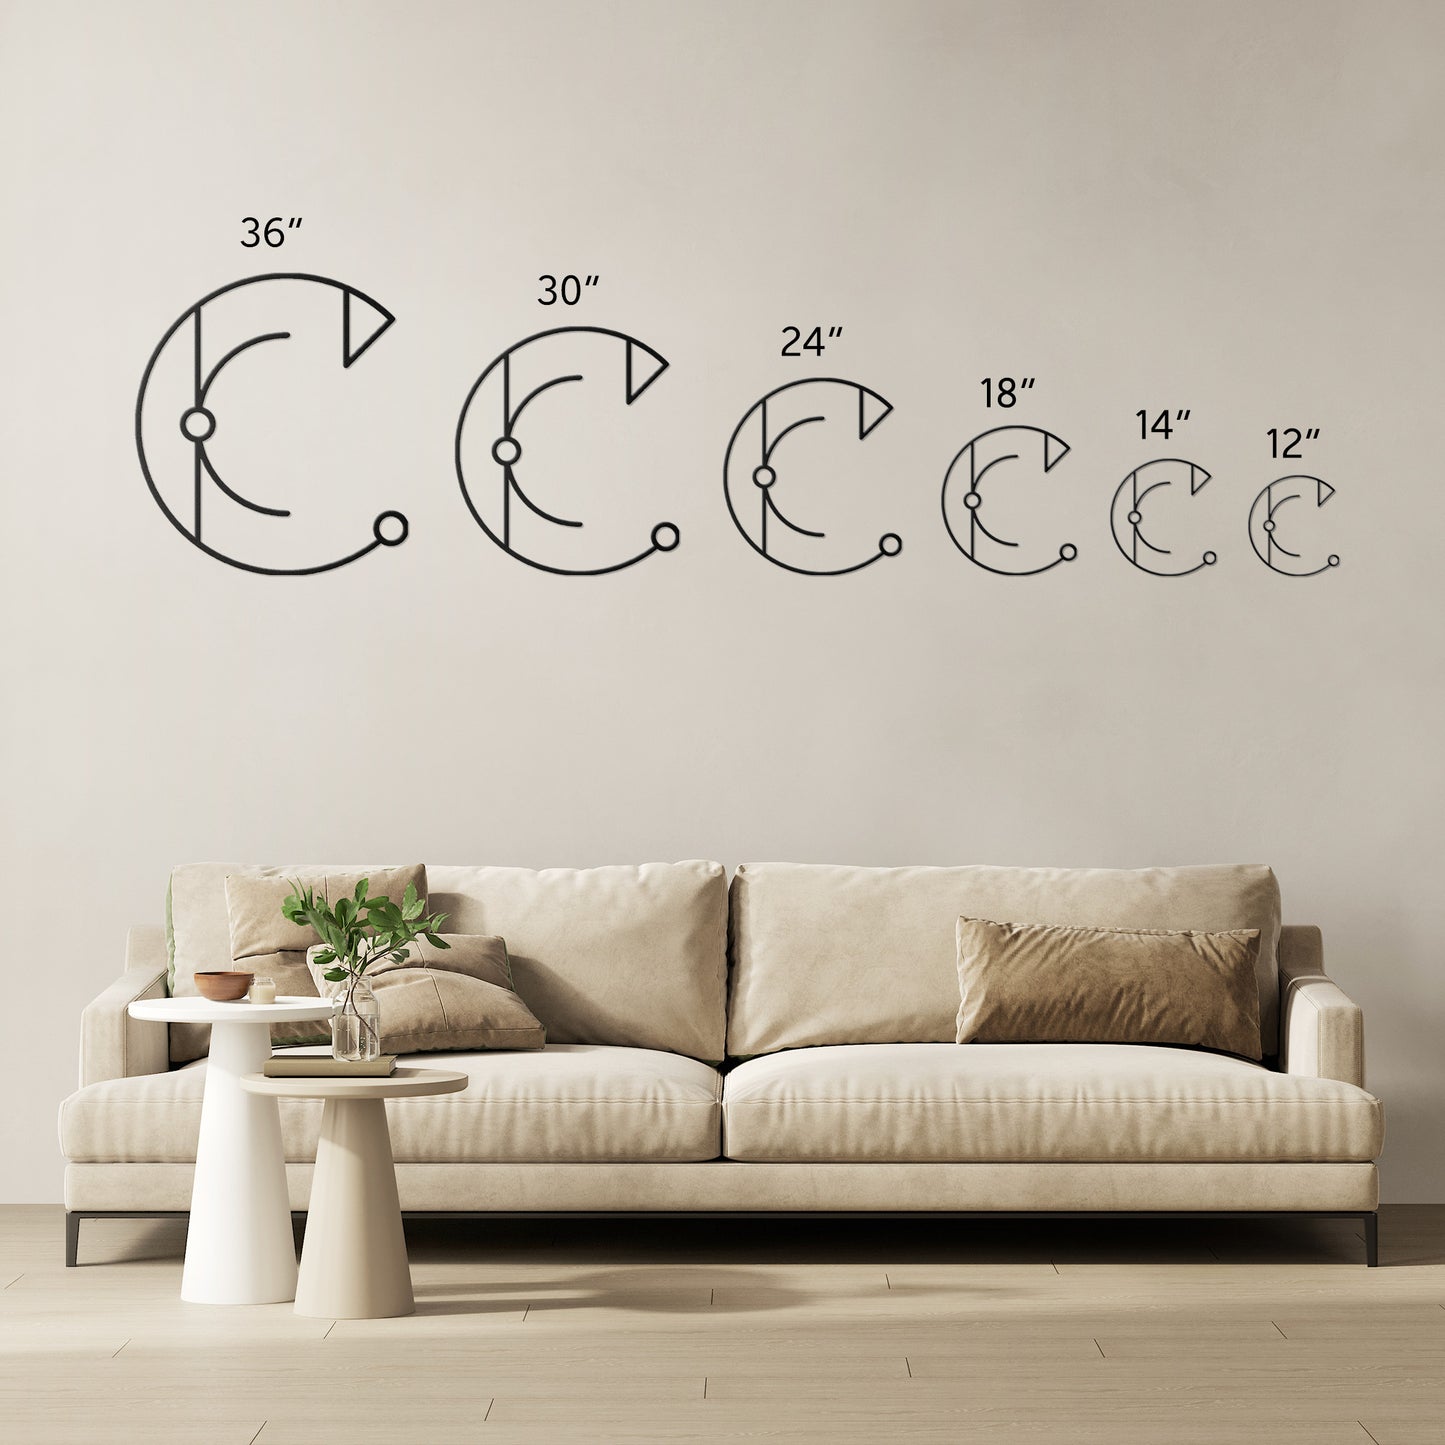 Letter C, Your Initial, Art Deco Letters, Monogram, Metal Signs, Rustic Sign, Wall Art, Wall Decor